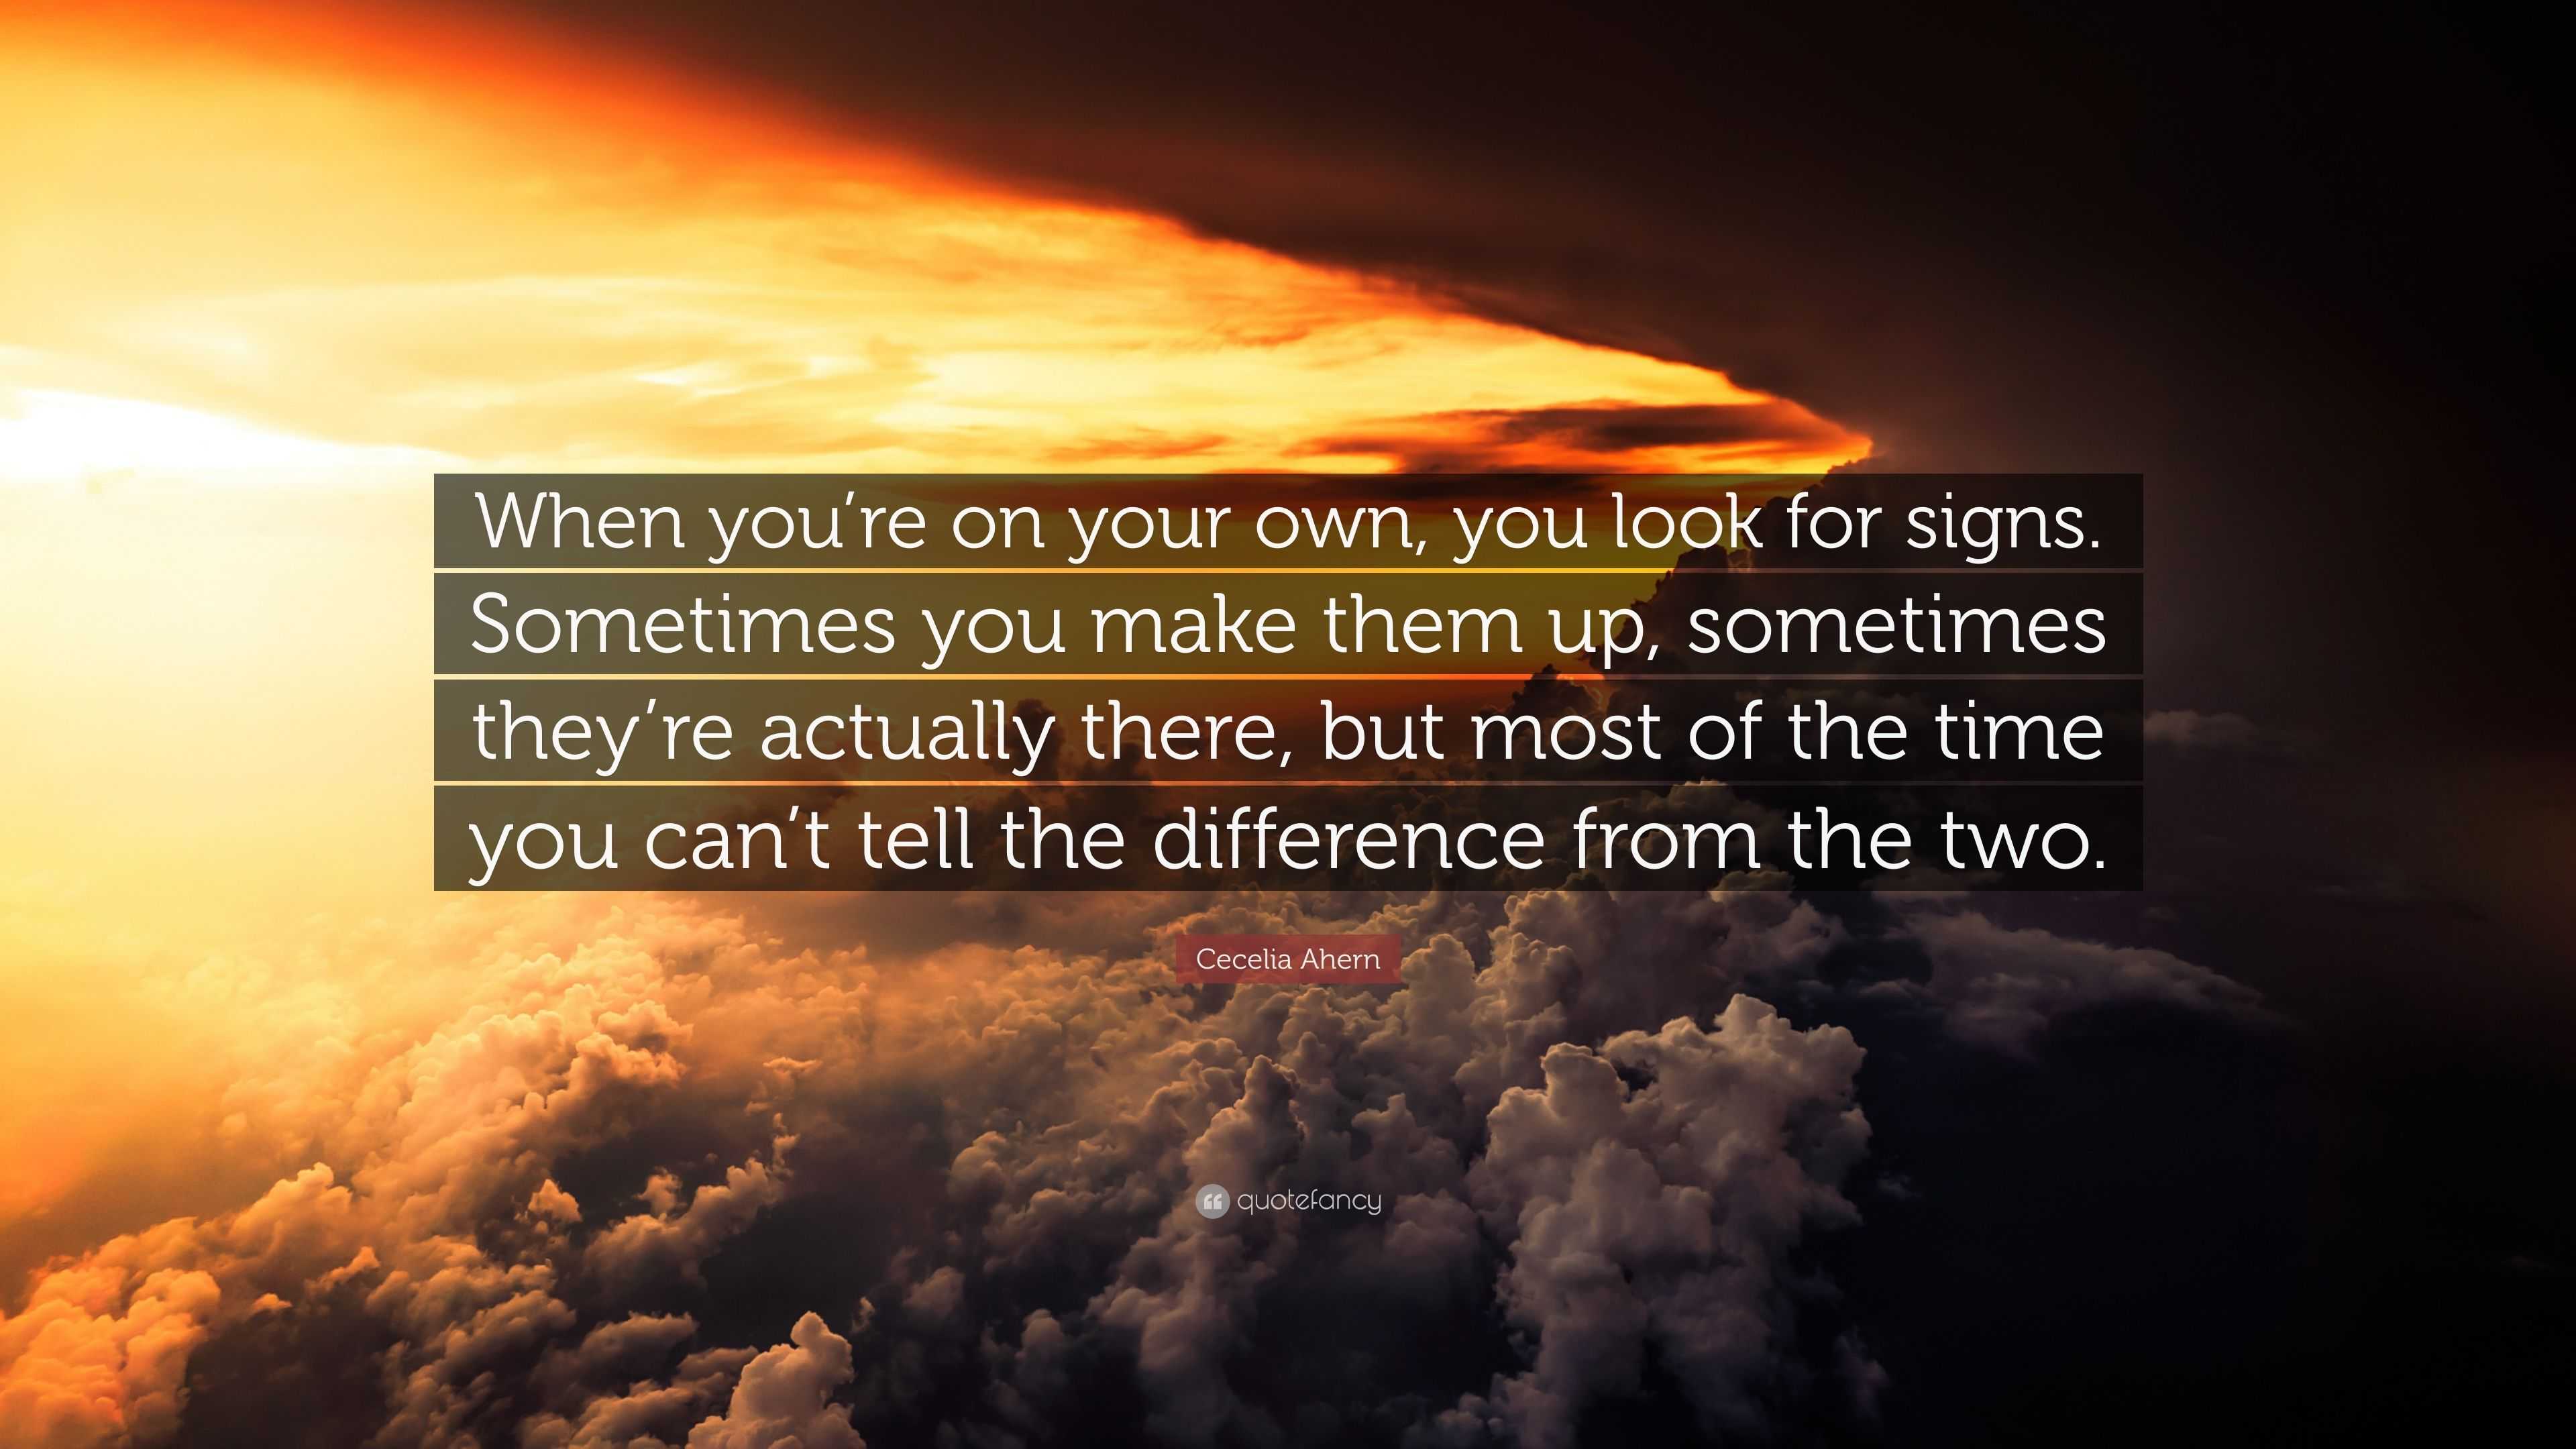 Cecelia Ahern Quote: “When you’re on your own, you look for signs ...